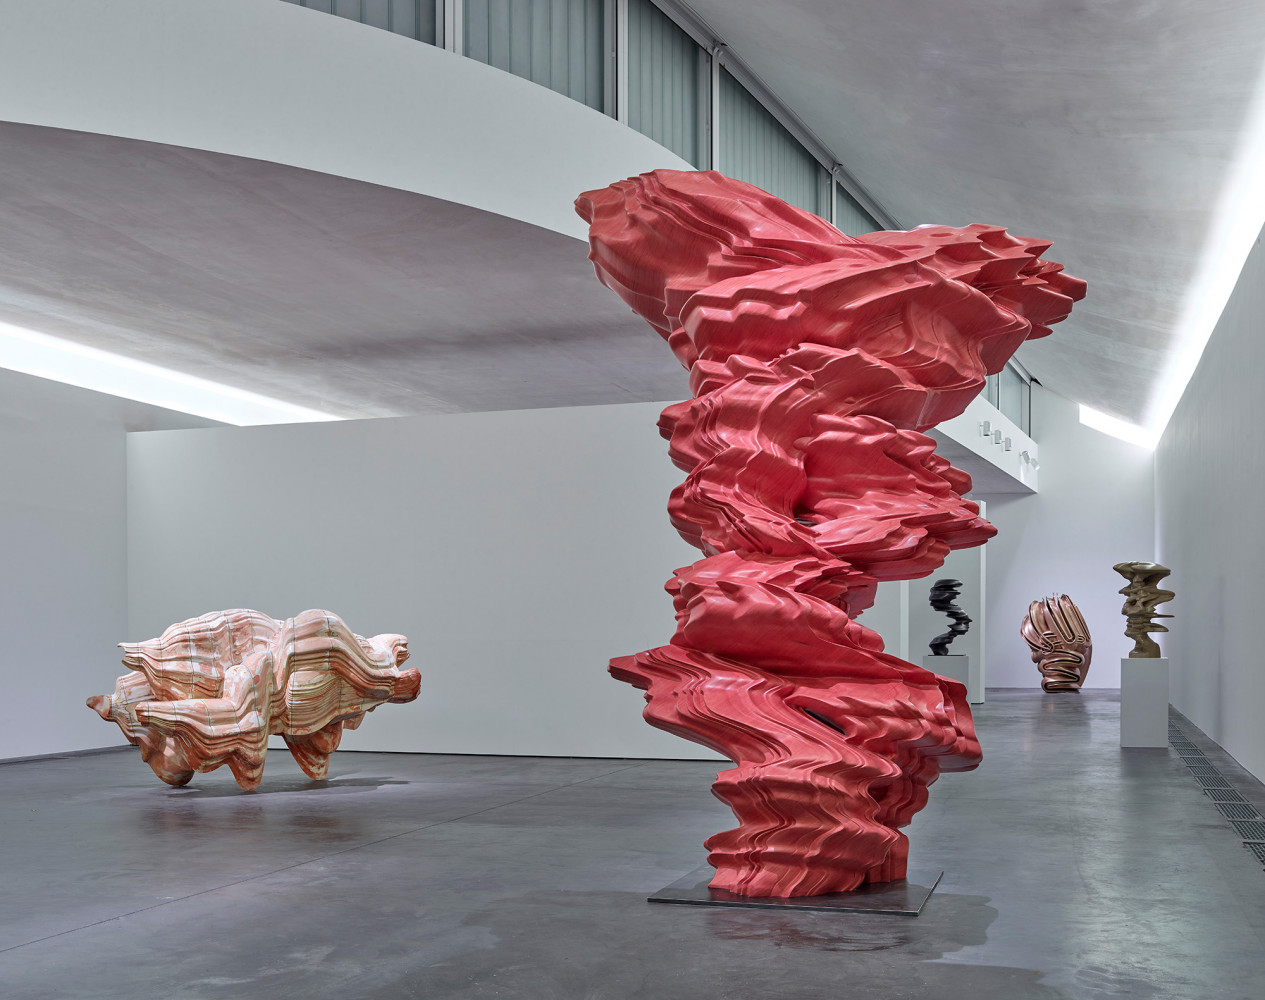 Tony Cragg, ‘Made on Earth, Heart Museum, Herning, DK’, Installation view, Buchmann Galerie, 2022